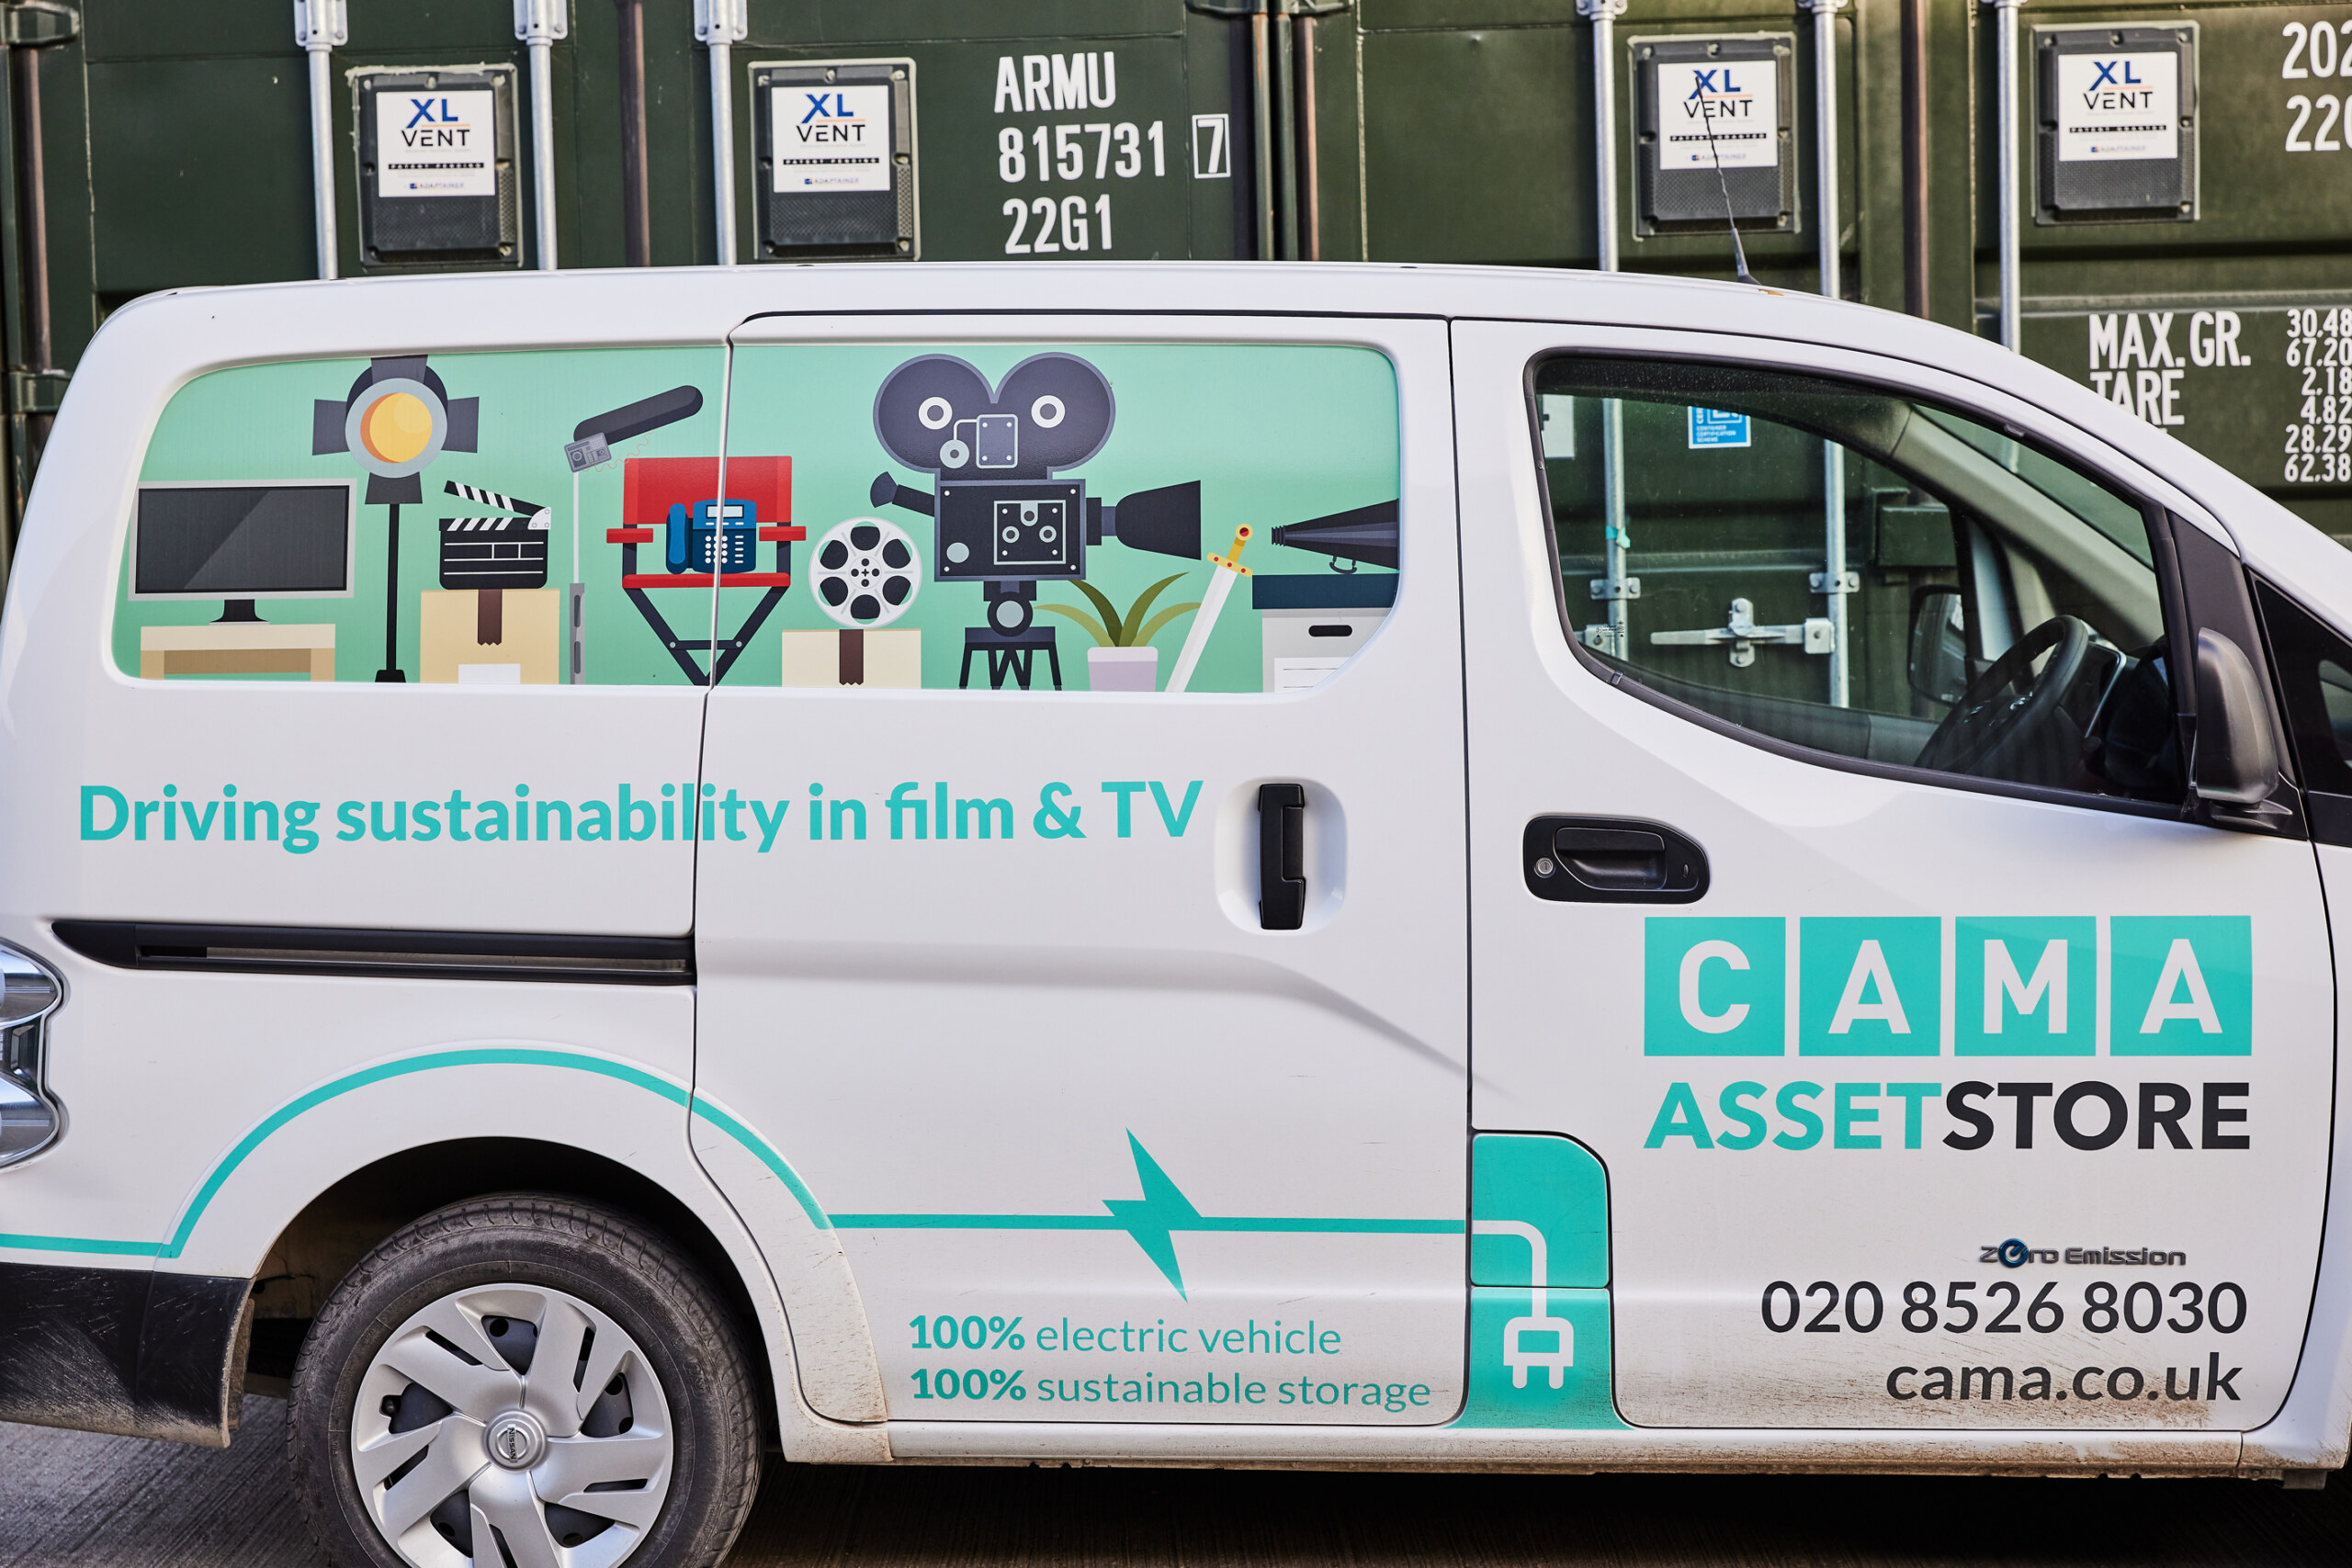 Our reuse service - revolutionising sustainability